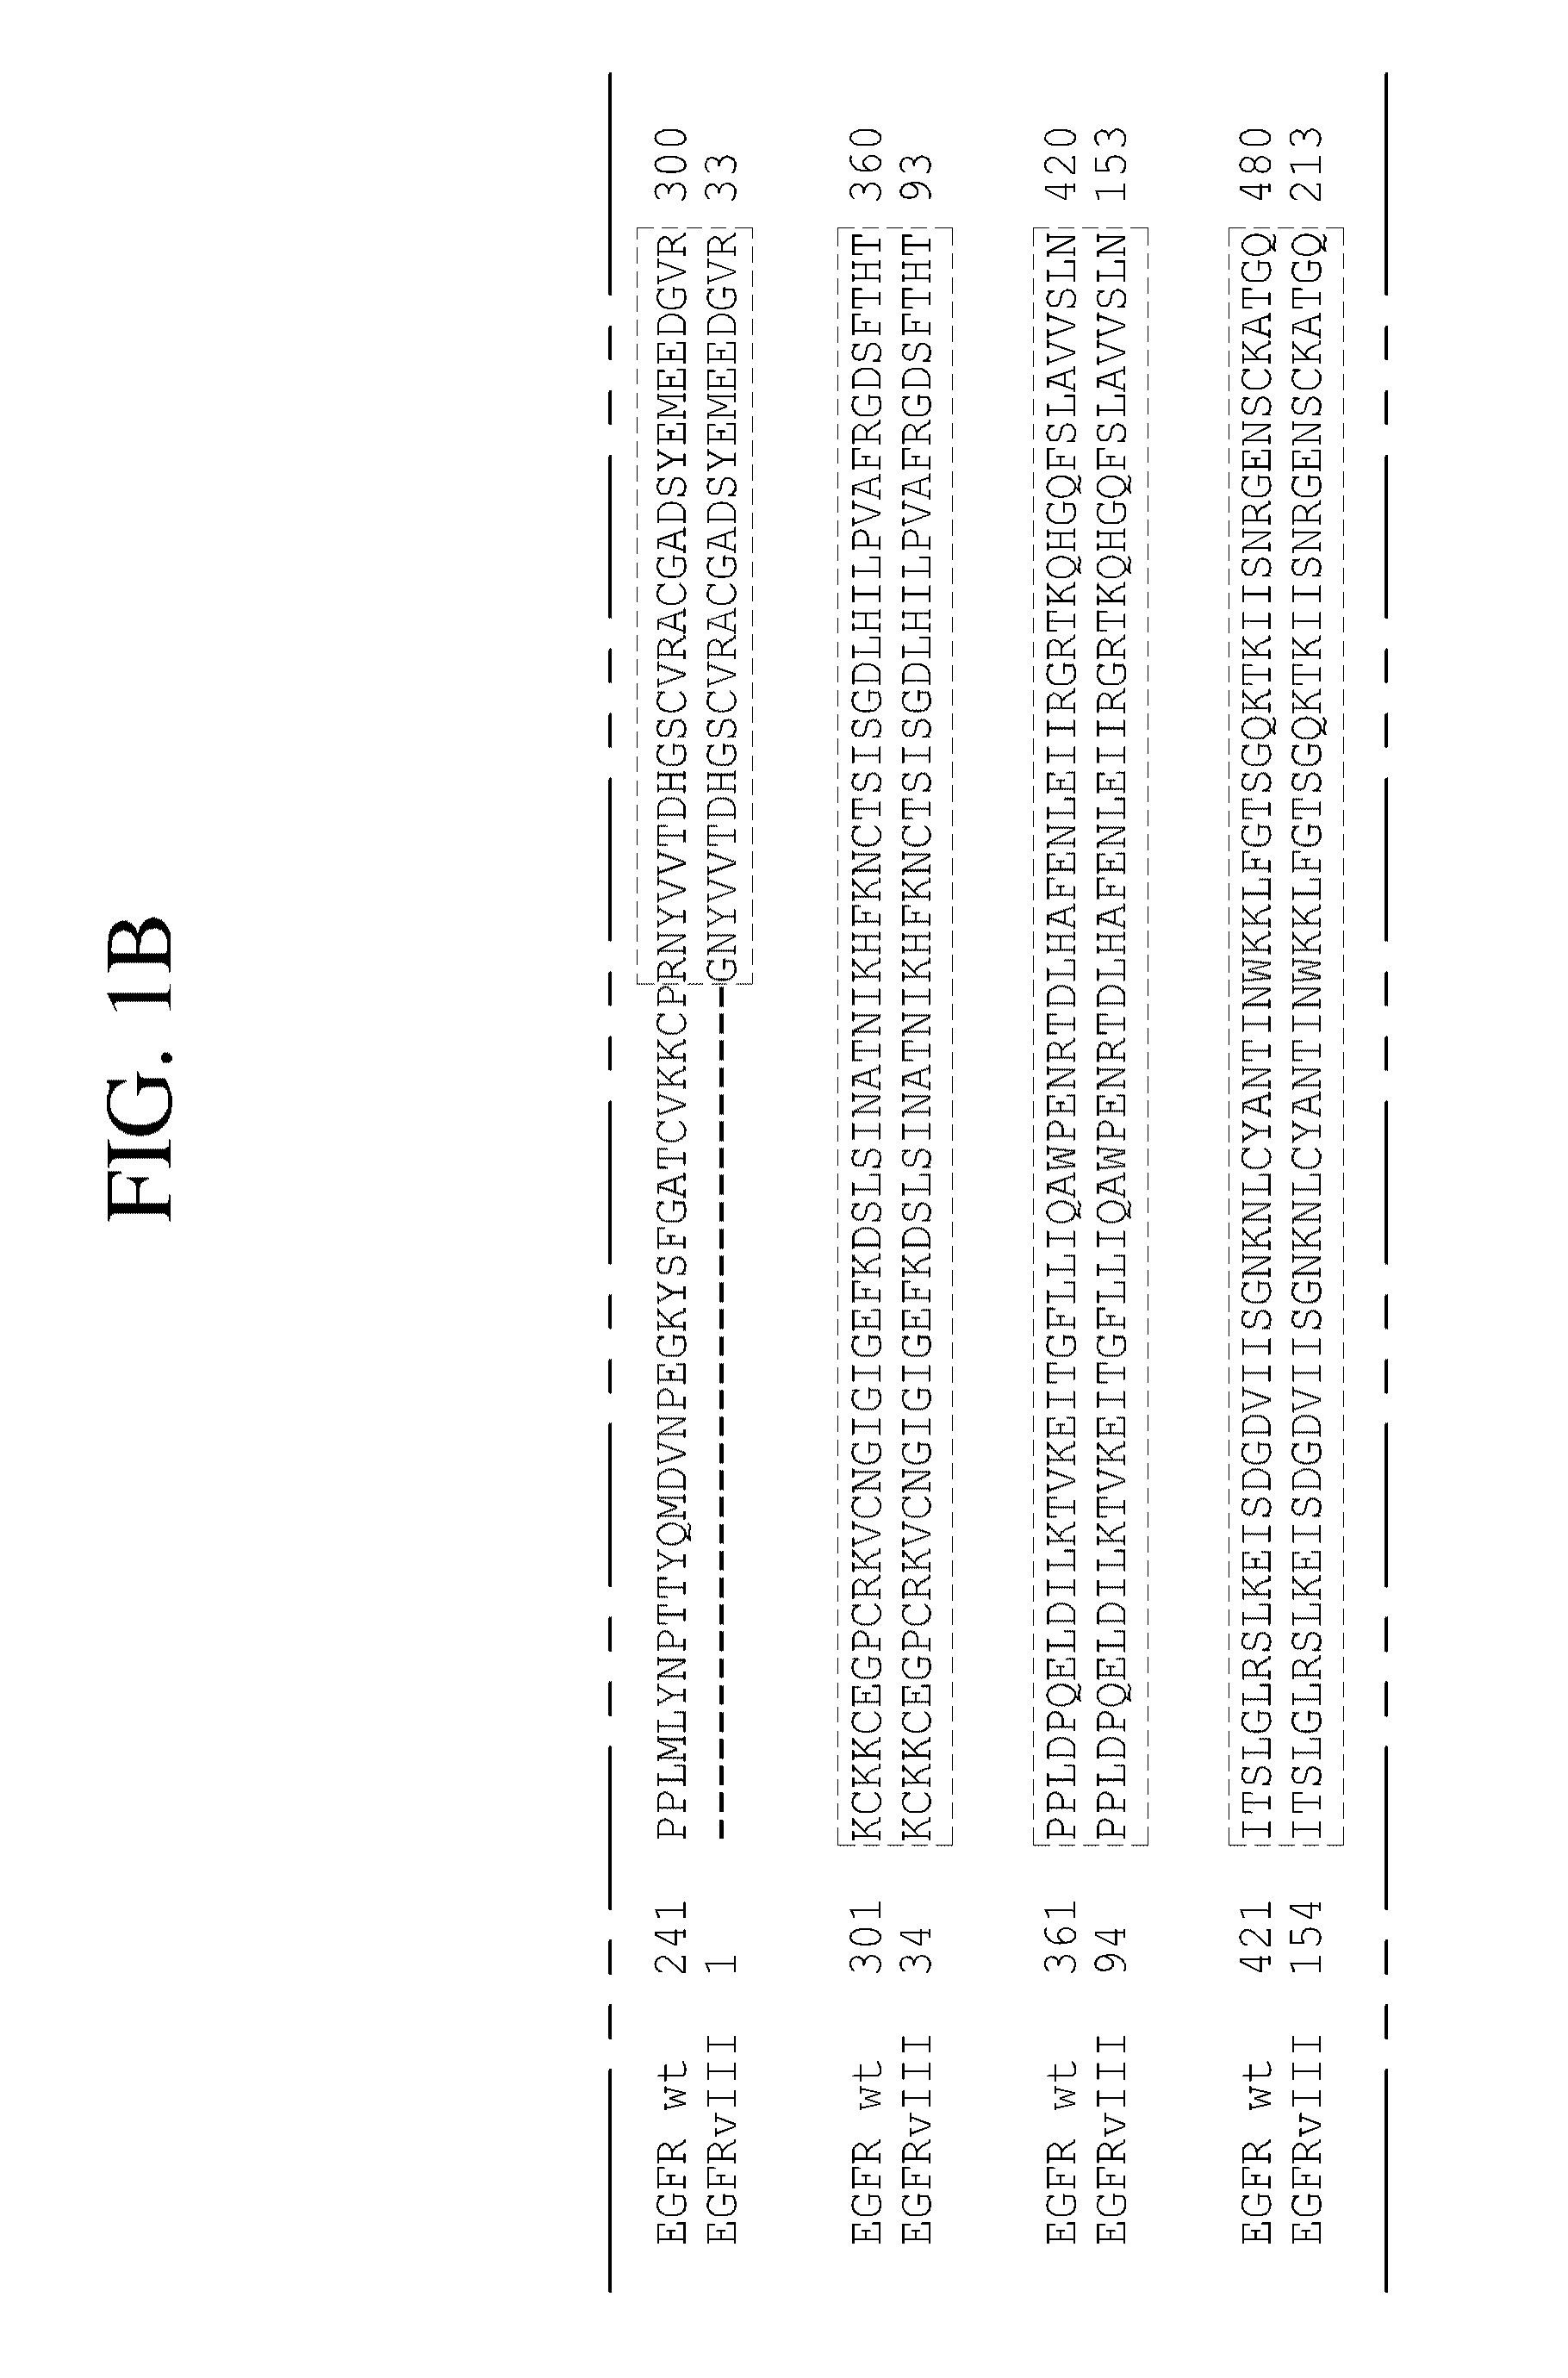 Antibodies directed to the deletion mutants of epidermal growth factor receptor and uses thereof